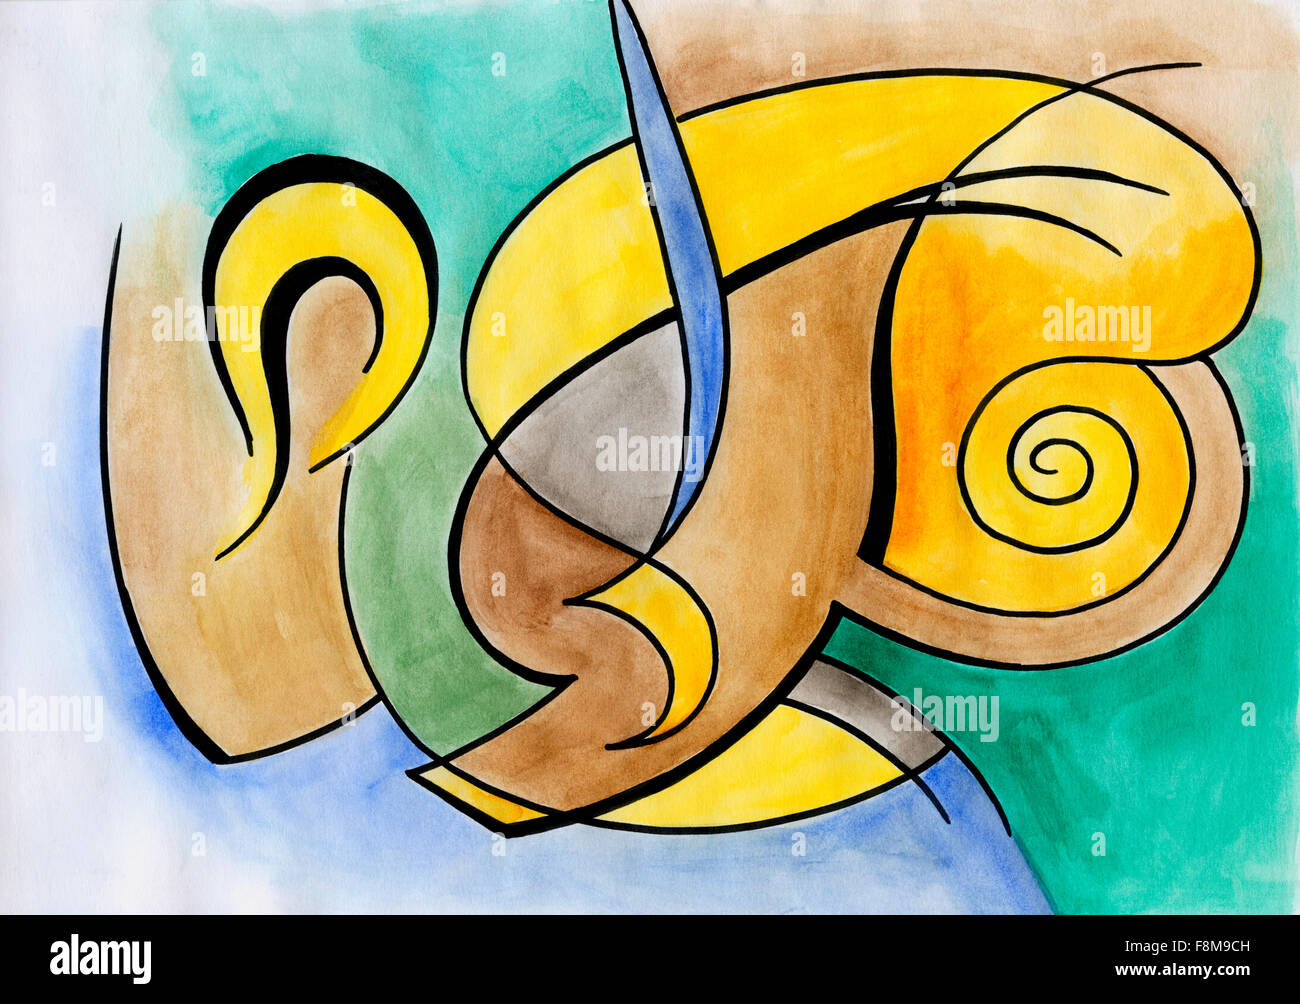 Abstract artwork with different shapes and lines. Handmade illustration  executed in modern abstract style Stock Photo - Alamy